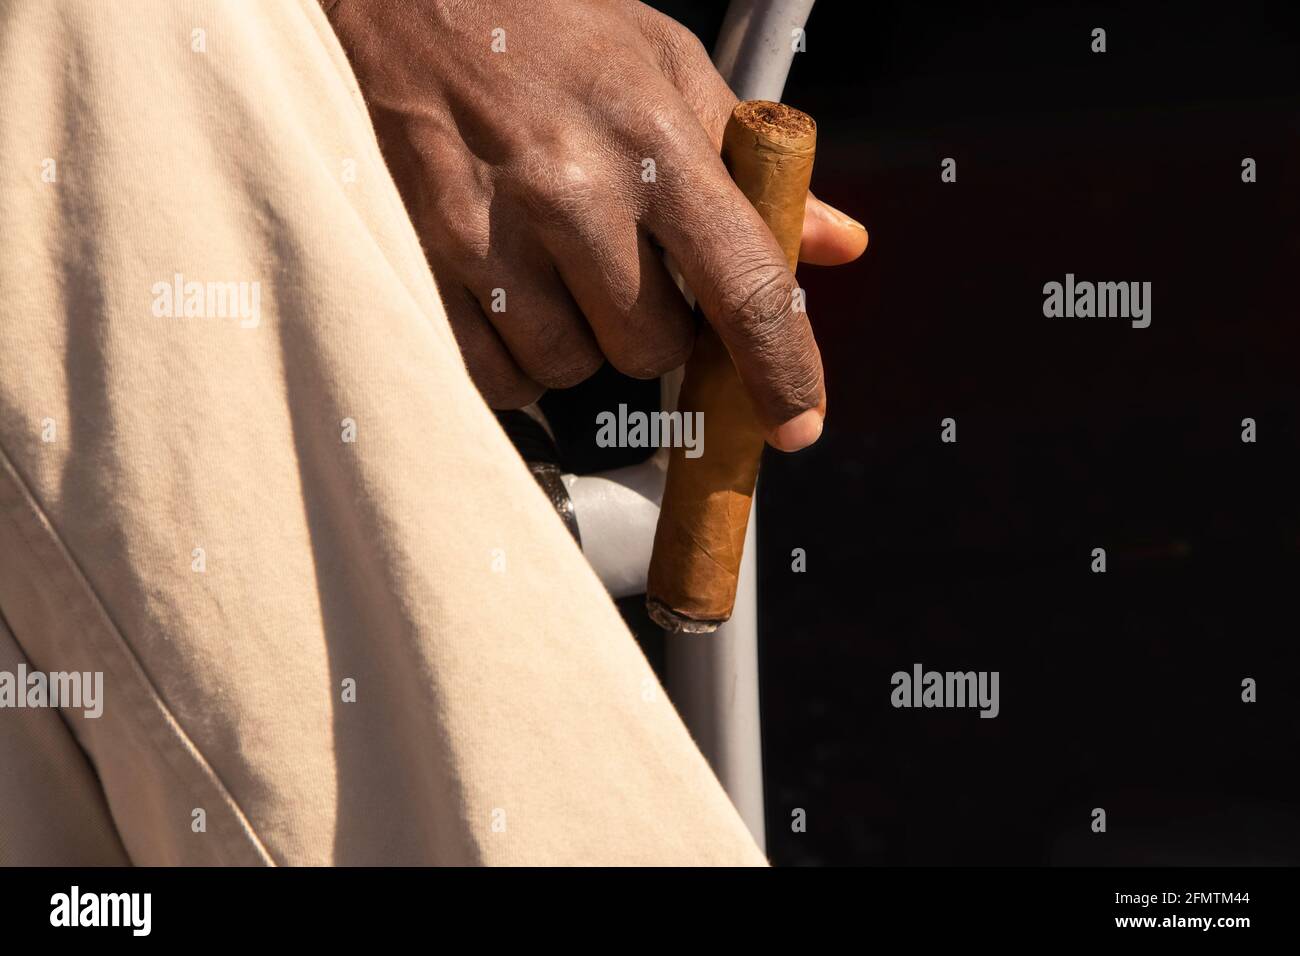 That tropical feeling - Close-up of lit cigar held by sitting back man down by crossed leg in light khaki pant Stock Photo